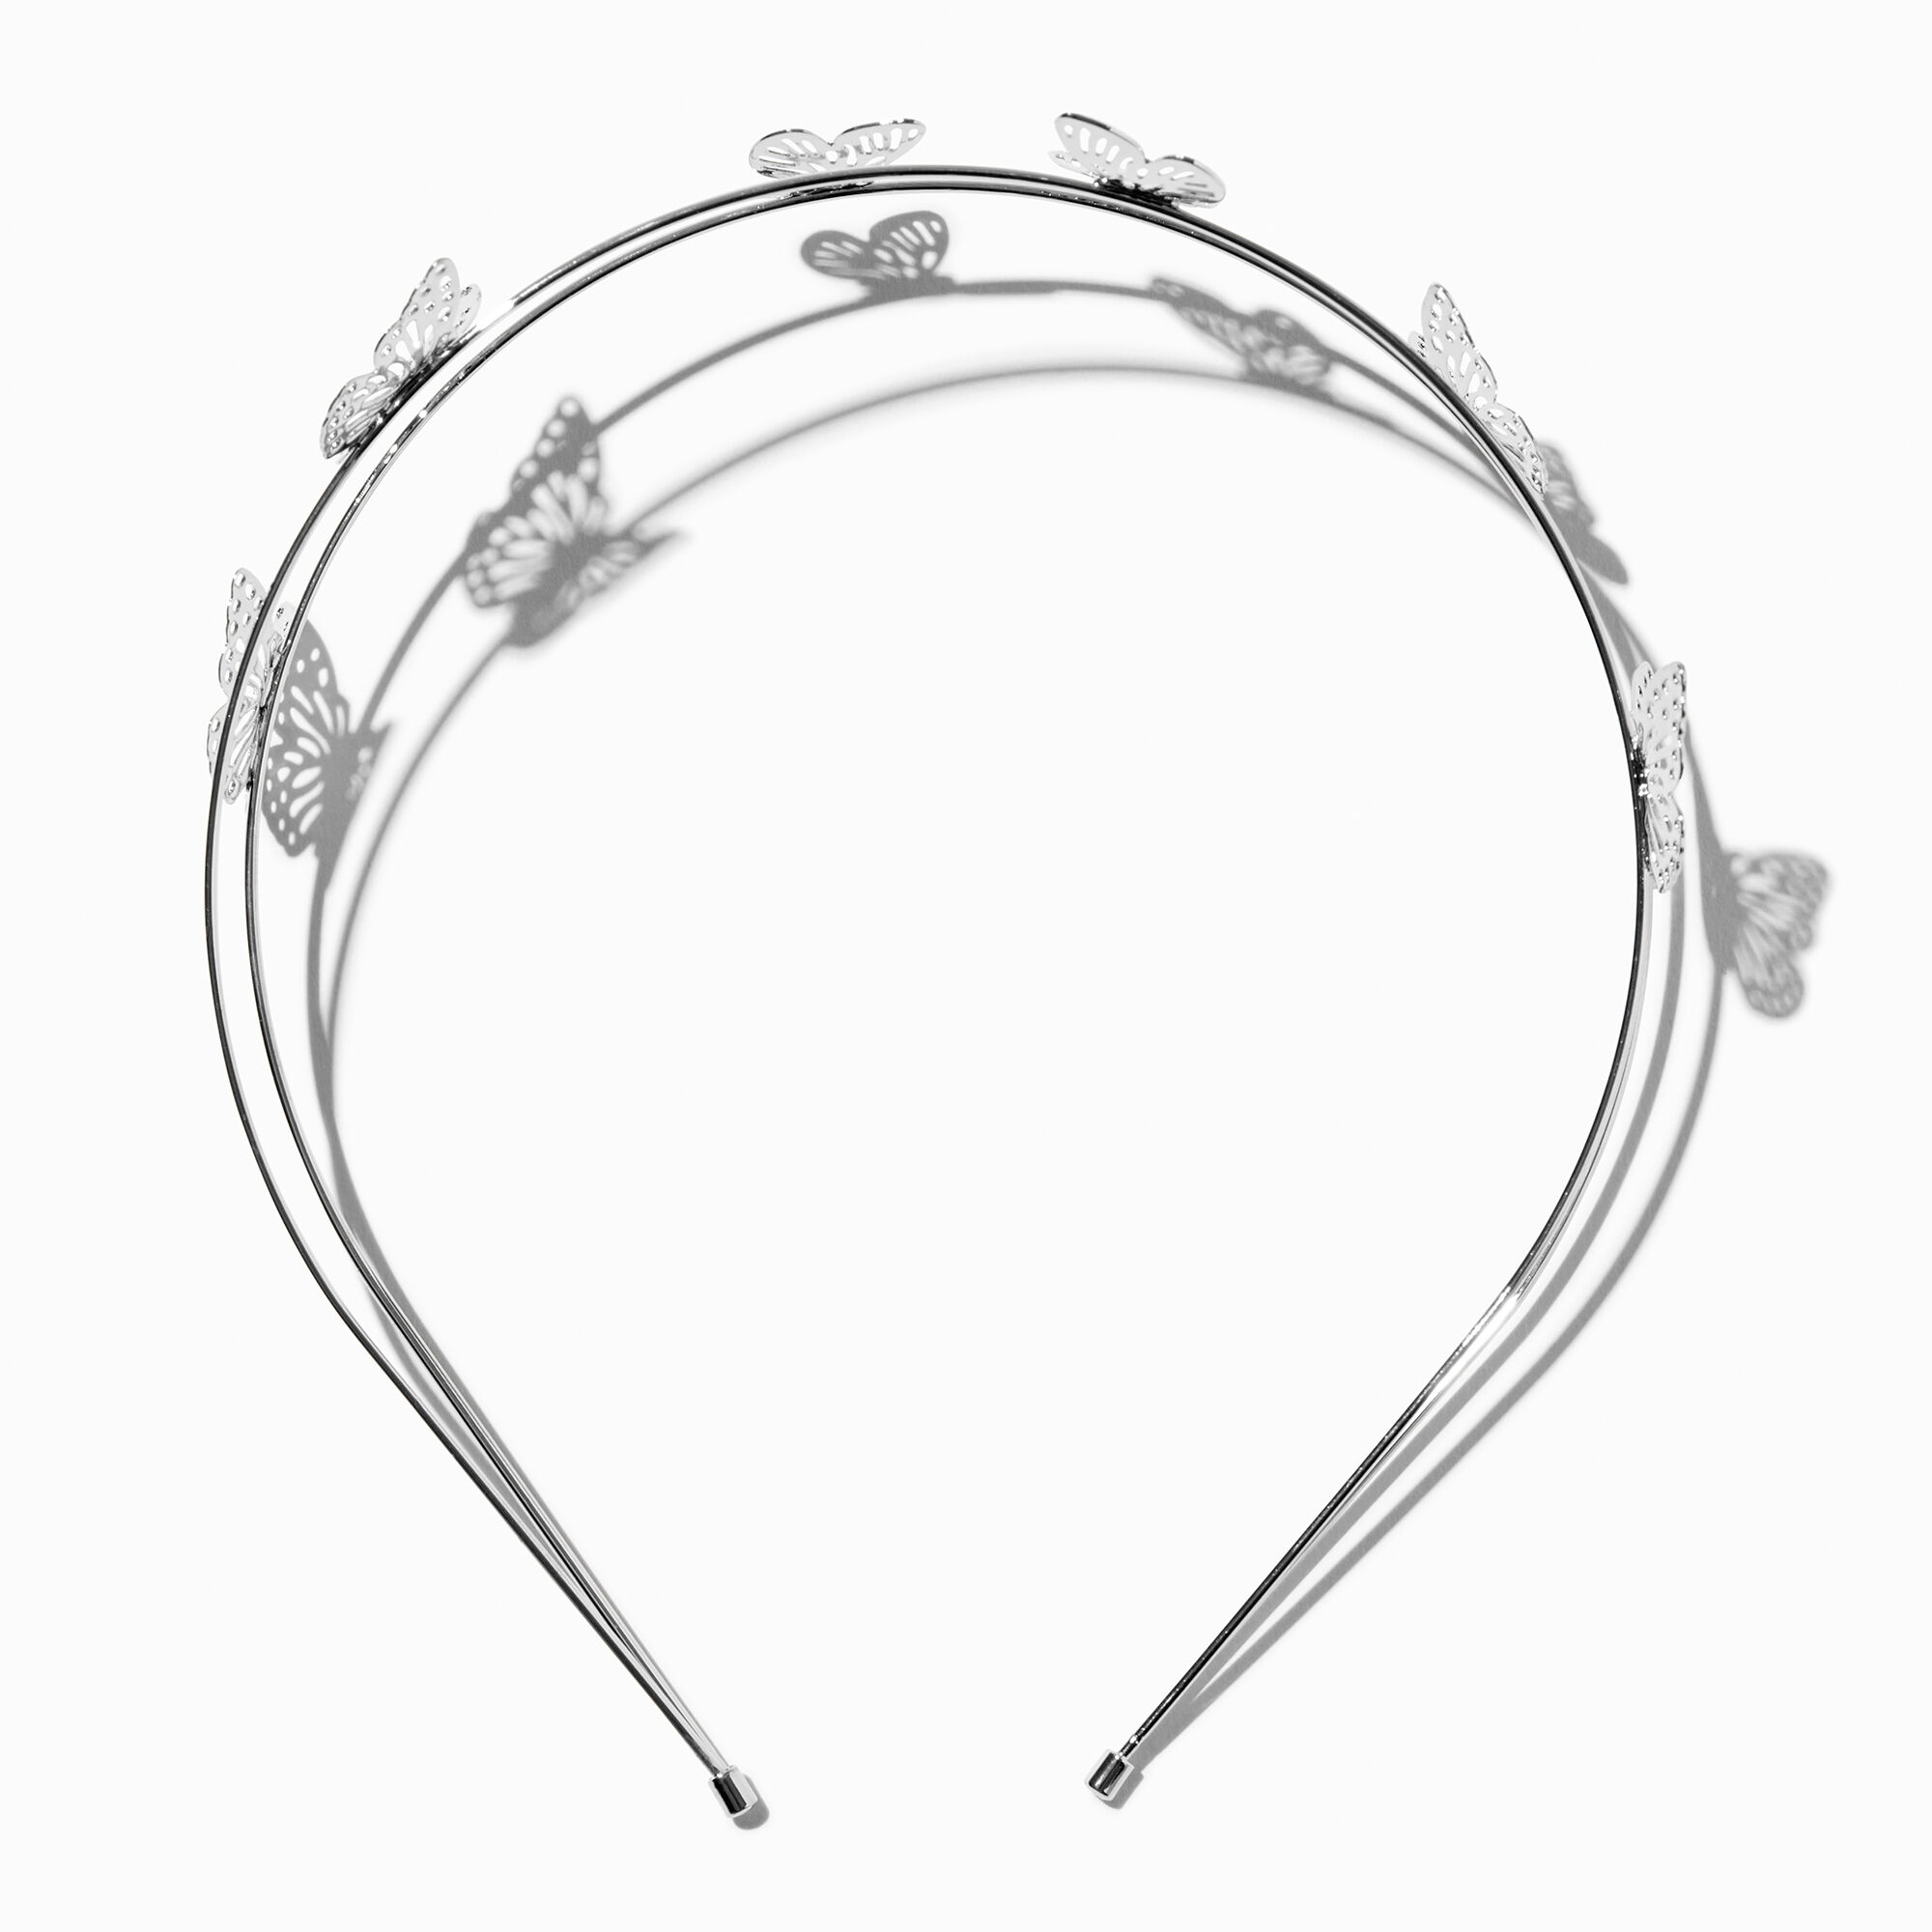 View Claires Butterfly Double Row Metal Headband Silver information